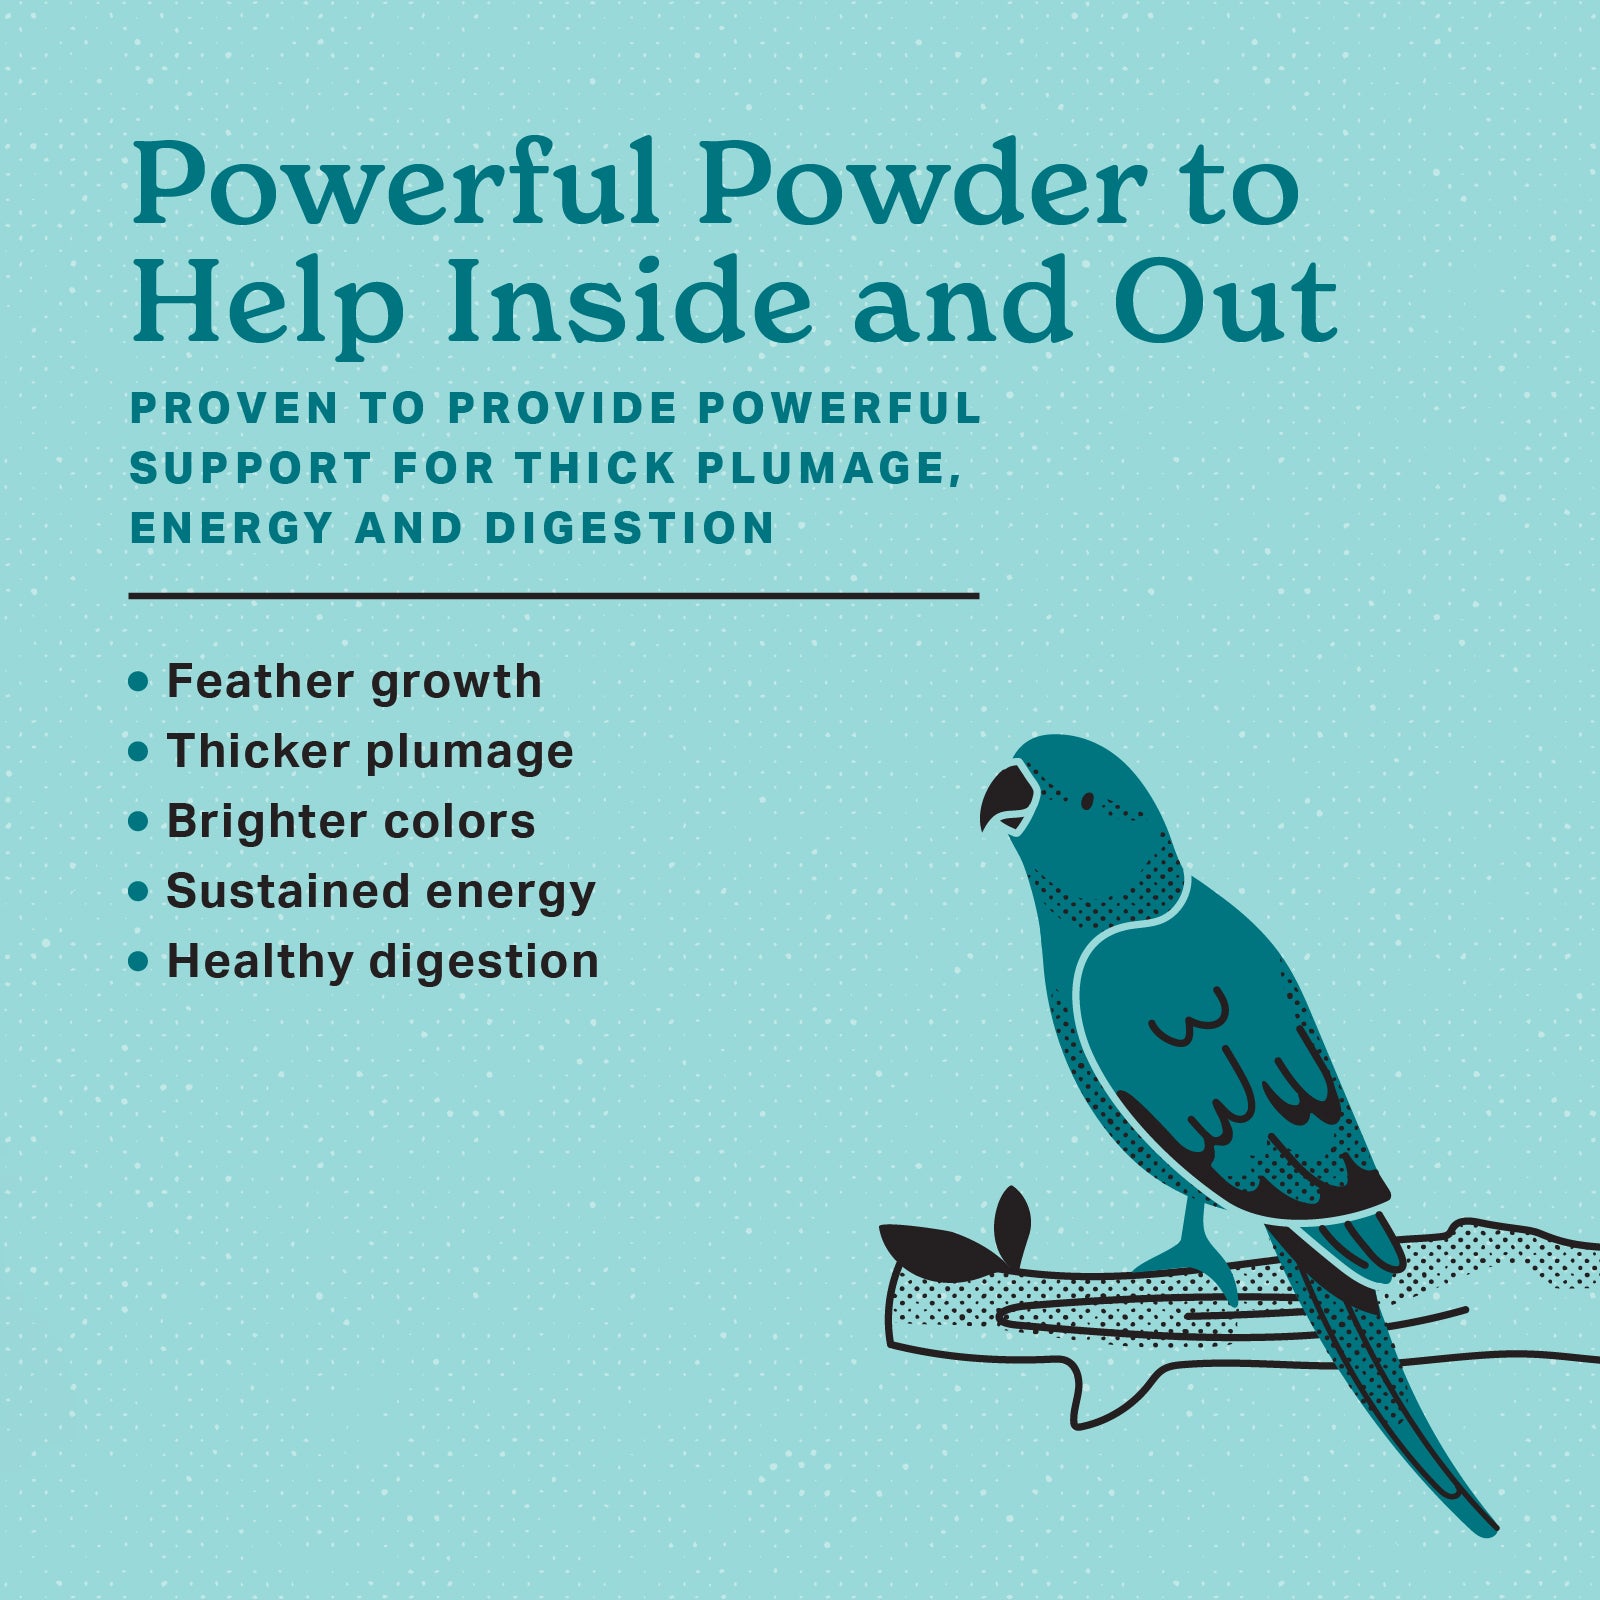 Powerful Powder to help inside and out.  Proven to provide powerful support for thick plumage, energy and digestion.